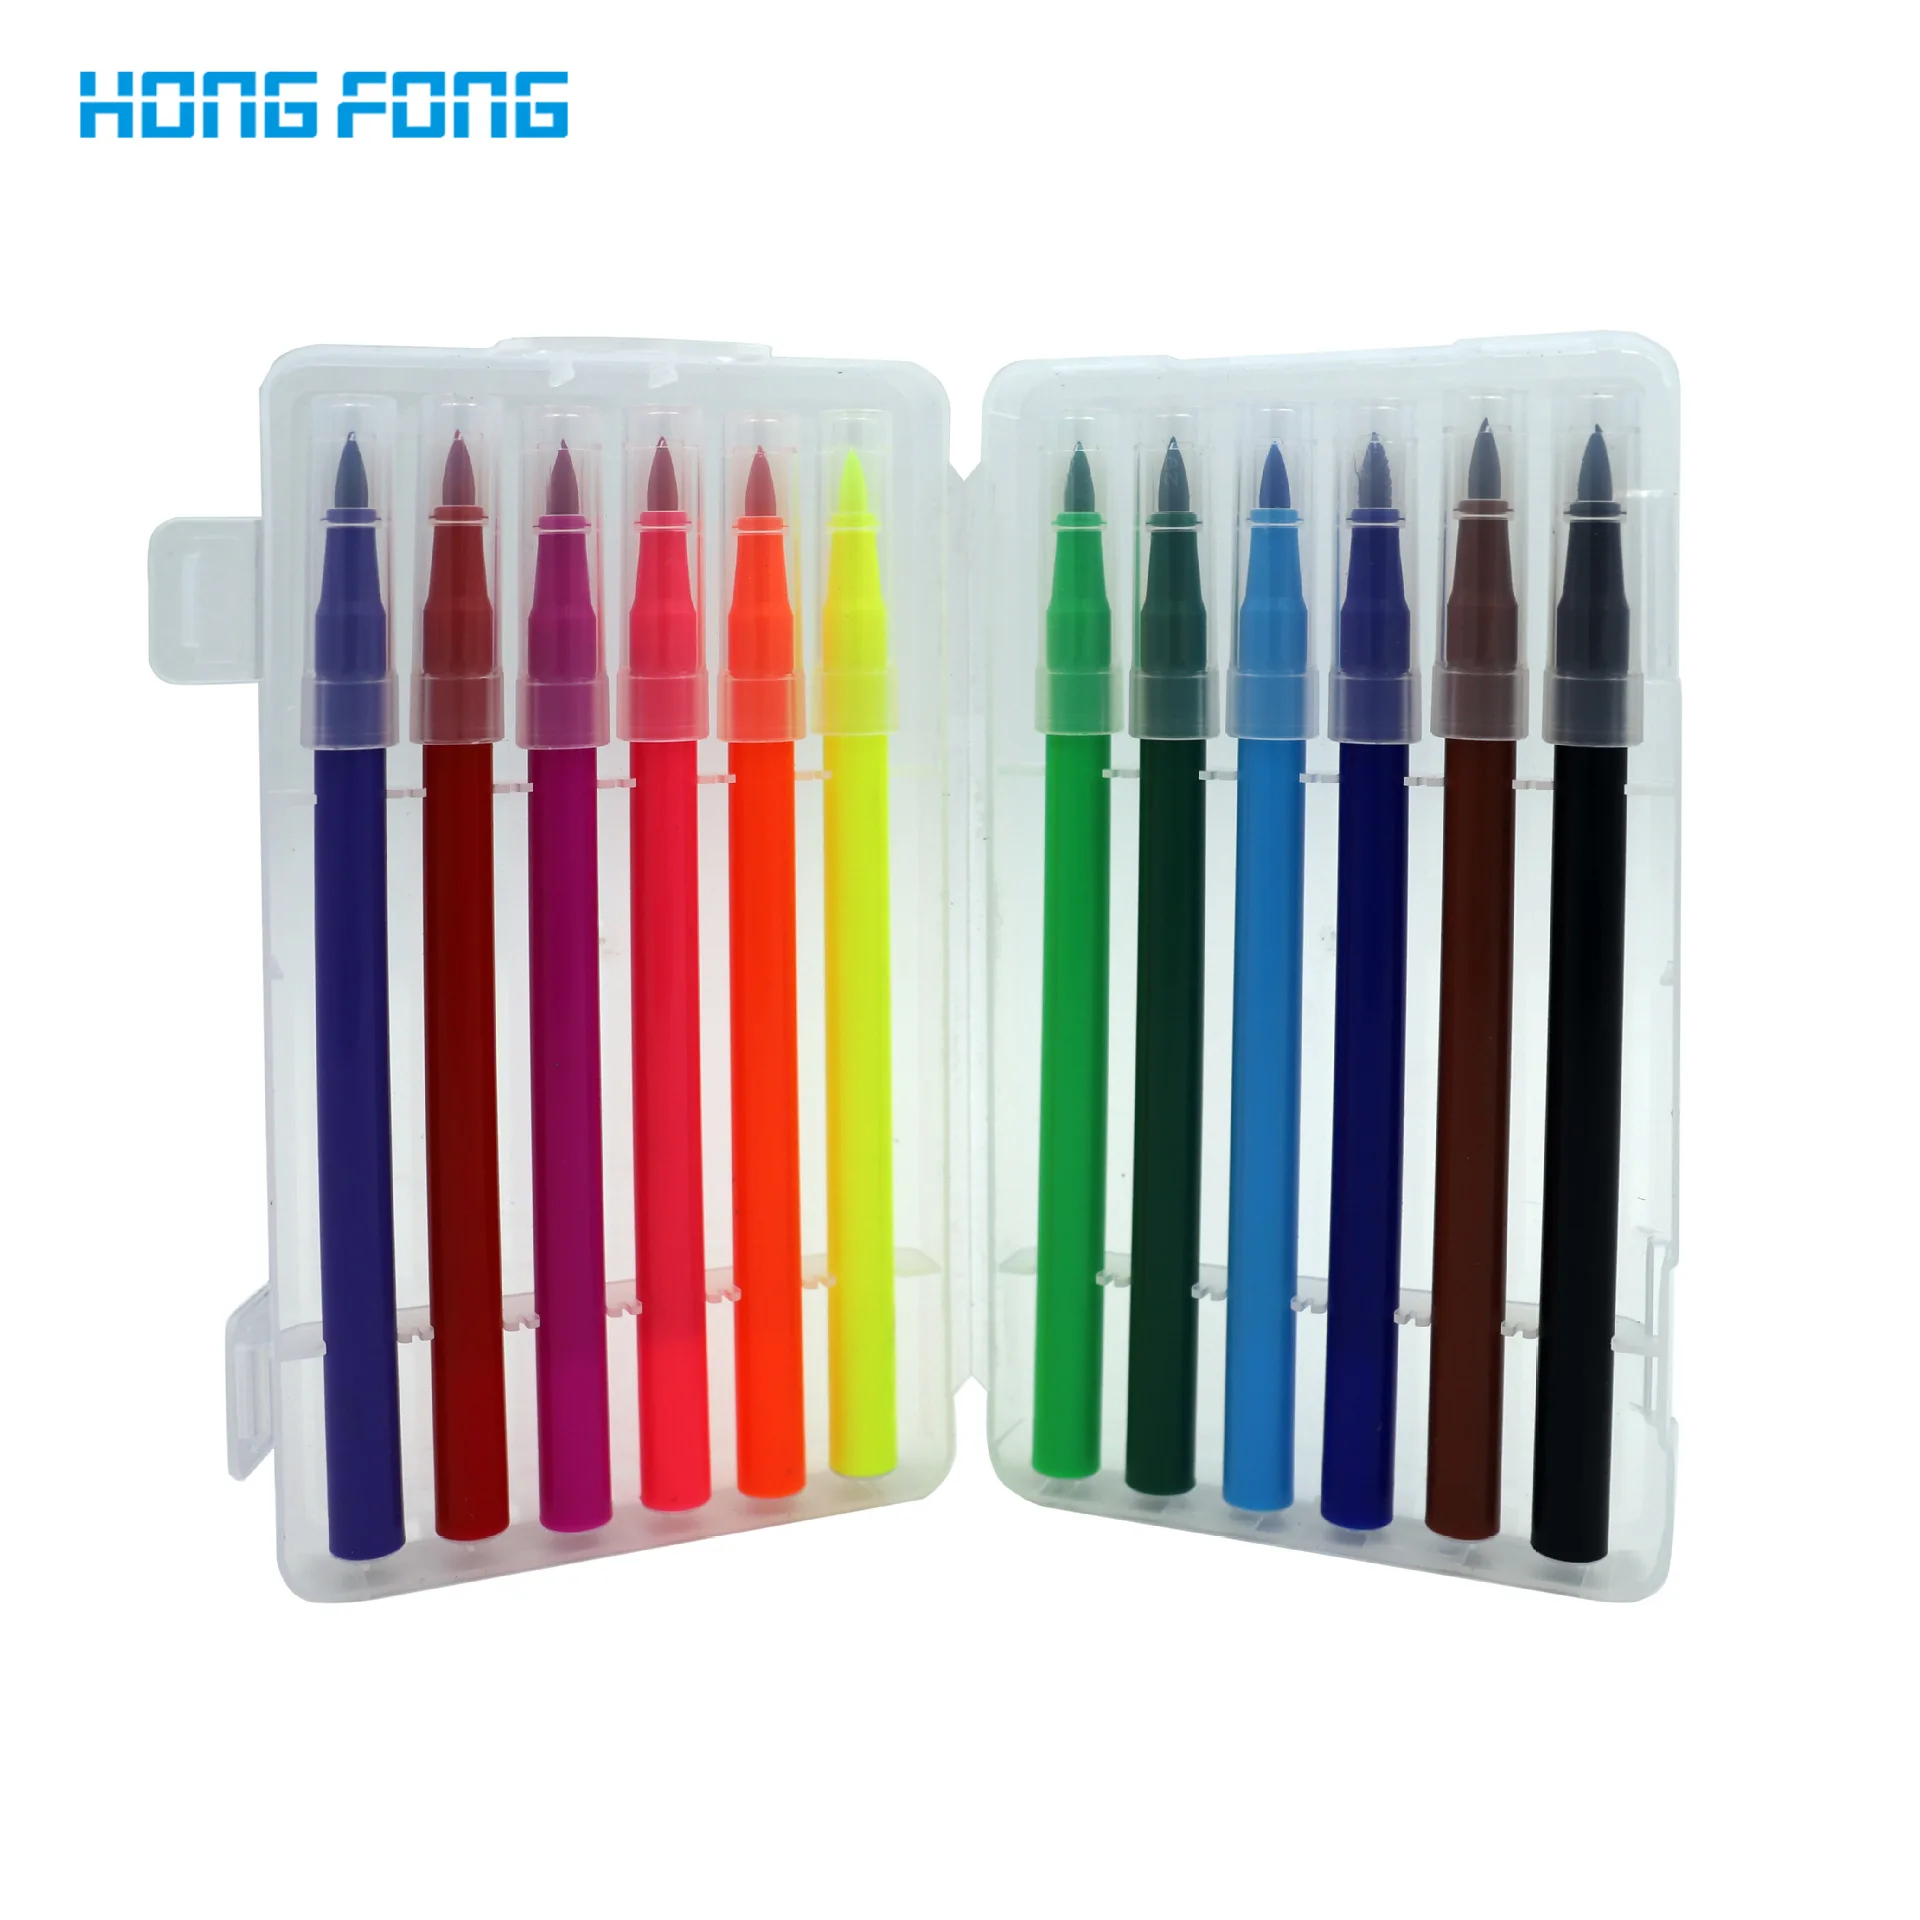 high quality hot sale brush tips watercolor marker art water mini brush pen set for calligraphy